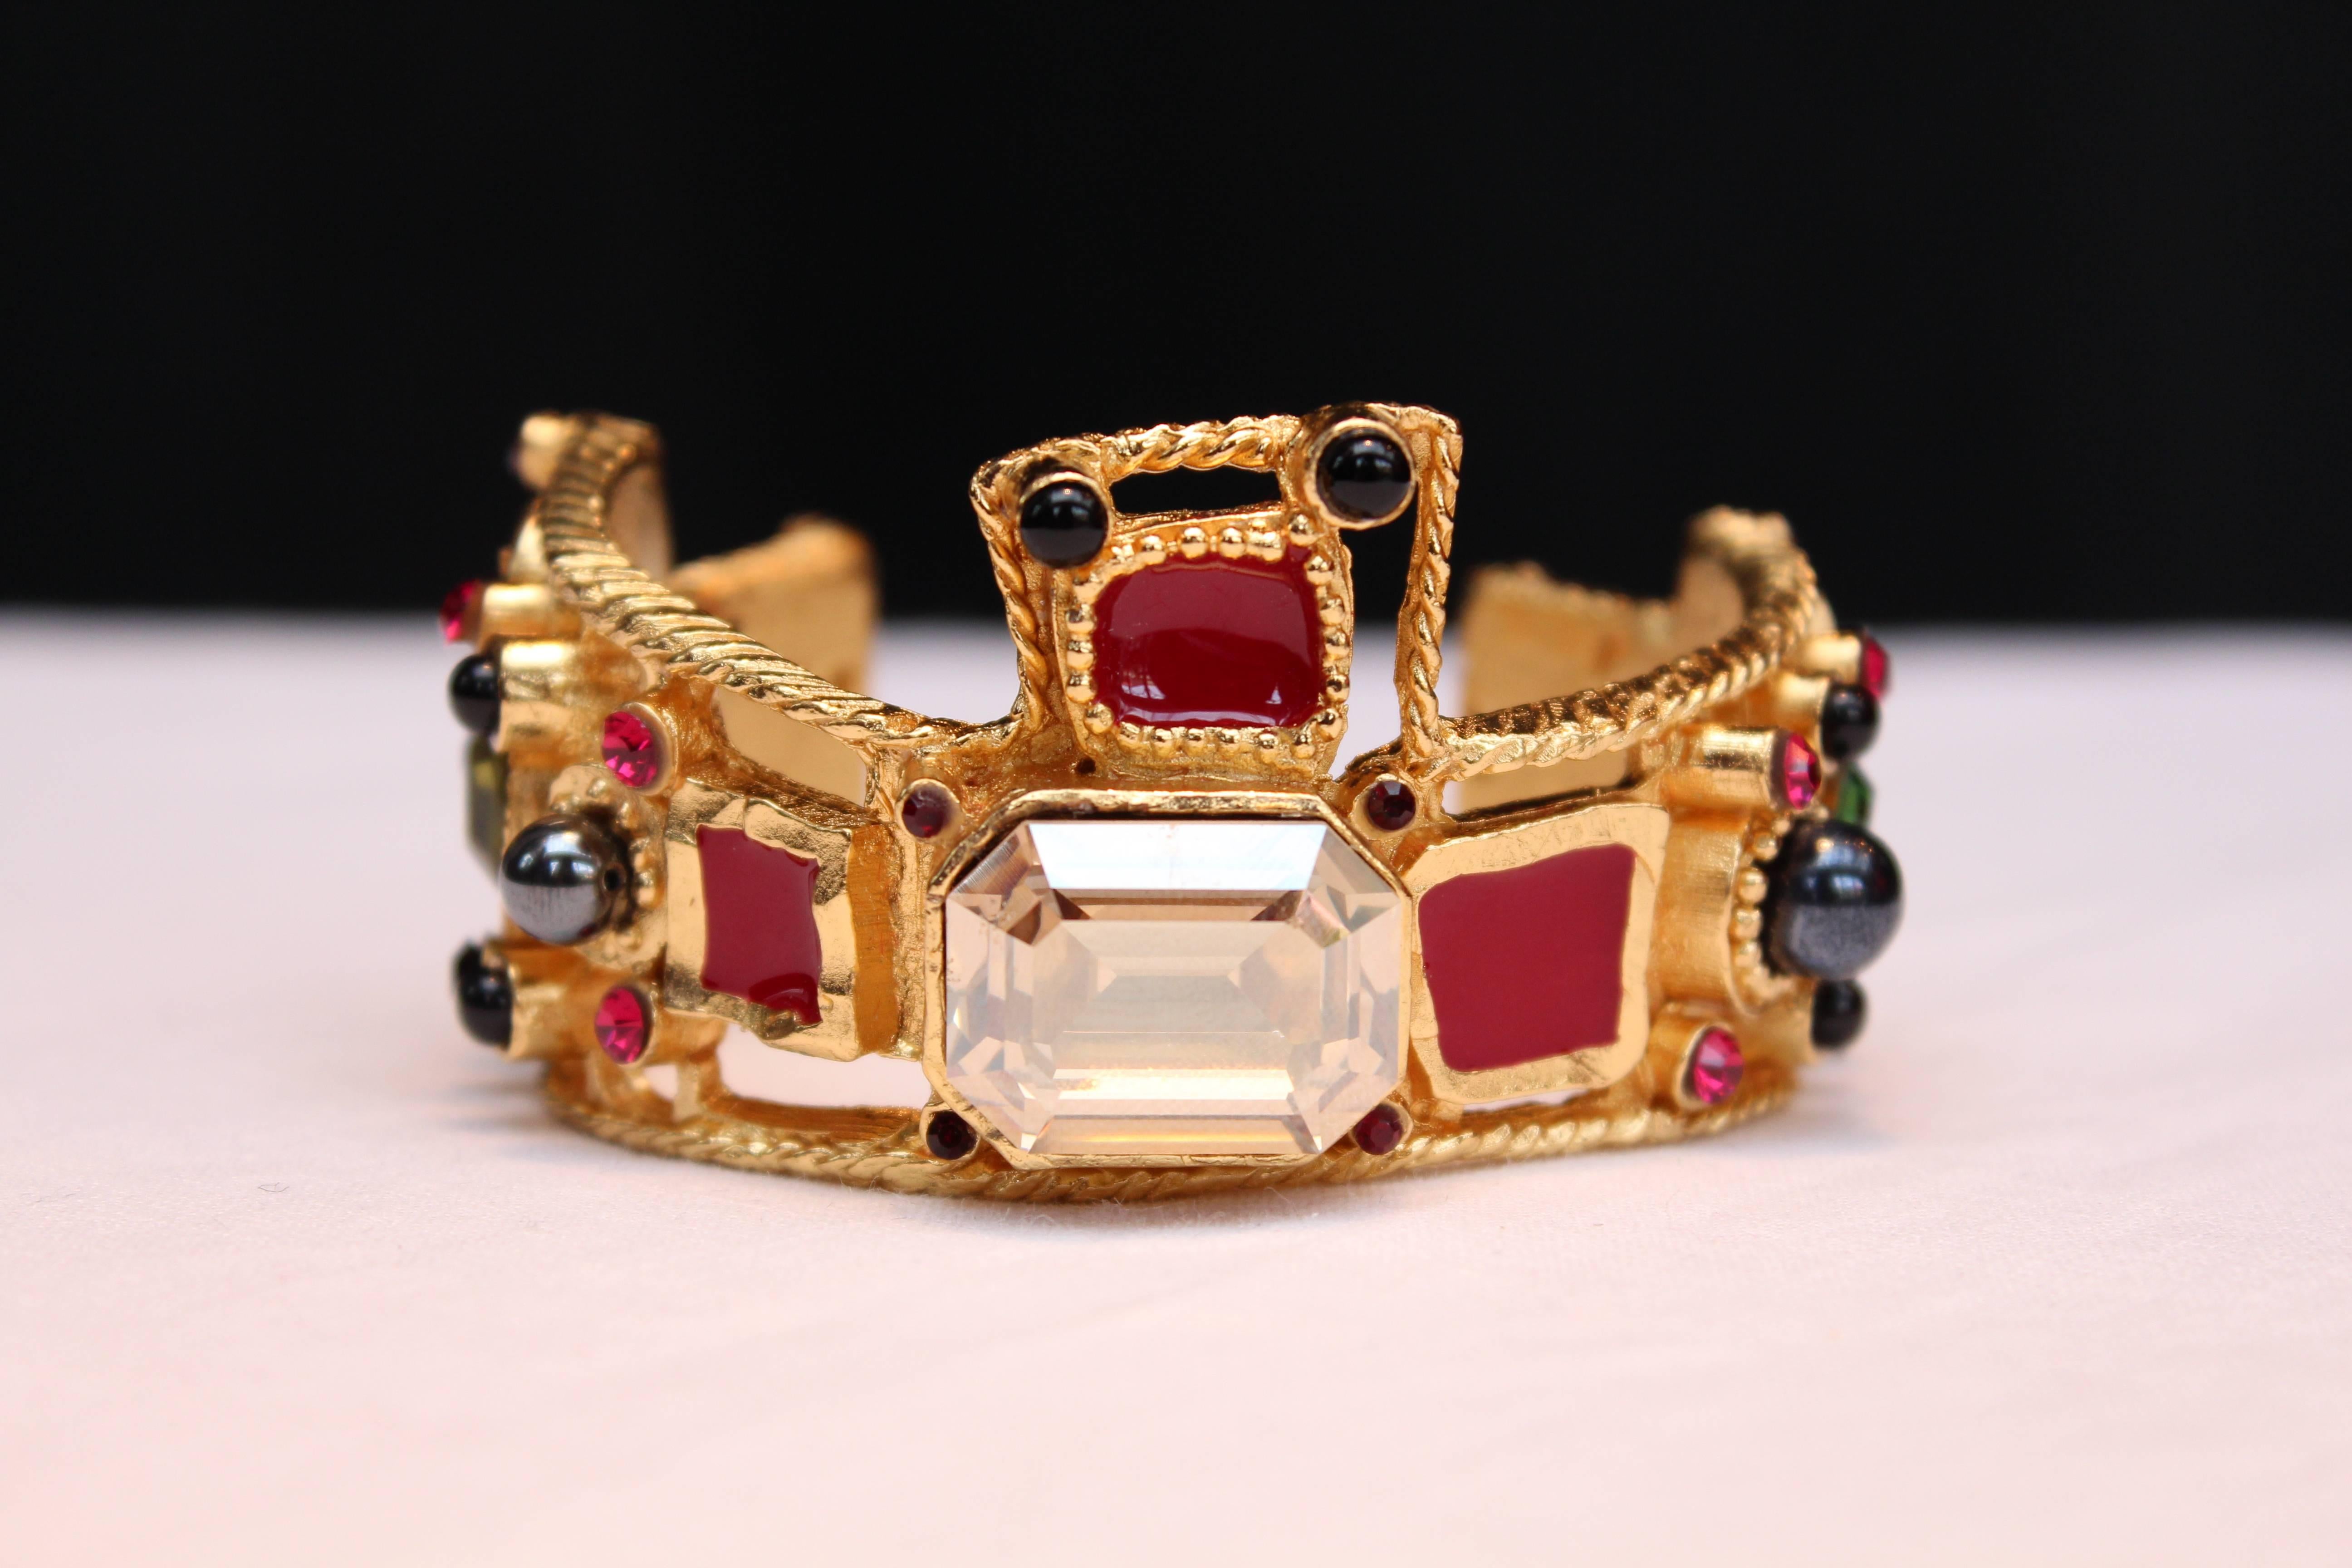 CHRISTIAN LACROIX (Made in France) Baroque cuff bracelet comprised of openwork chiseled gold metal paved with black red and blue cabochons as well green pink and white crystals. 

The cuff features in its center a large square faceted white